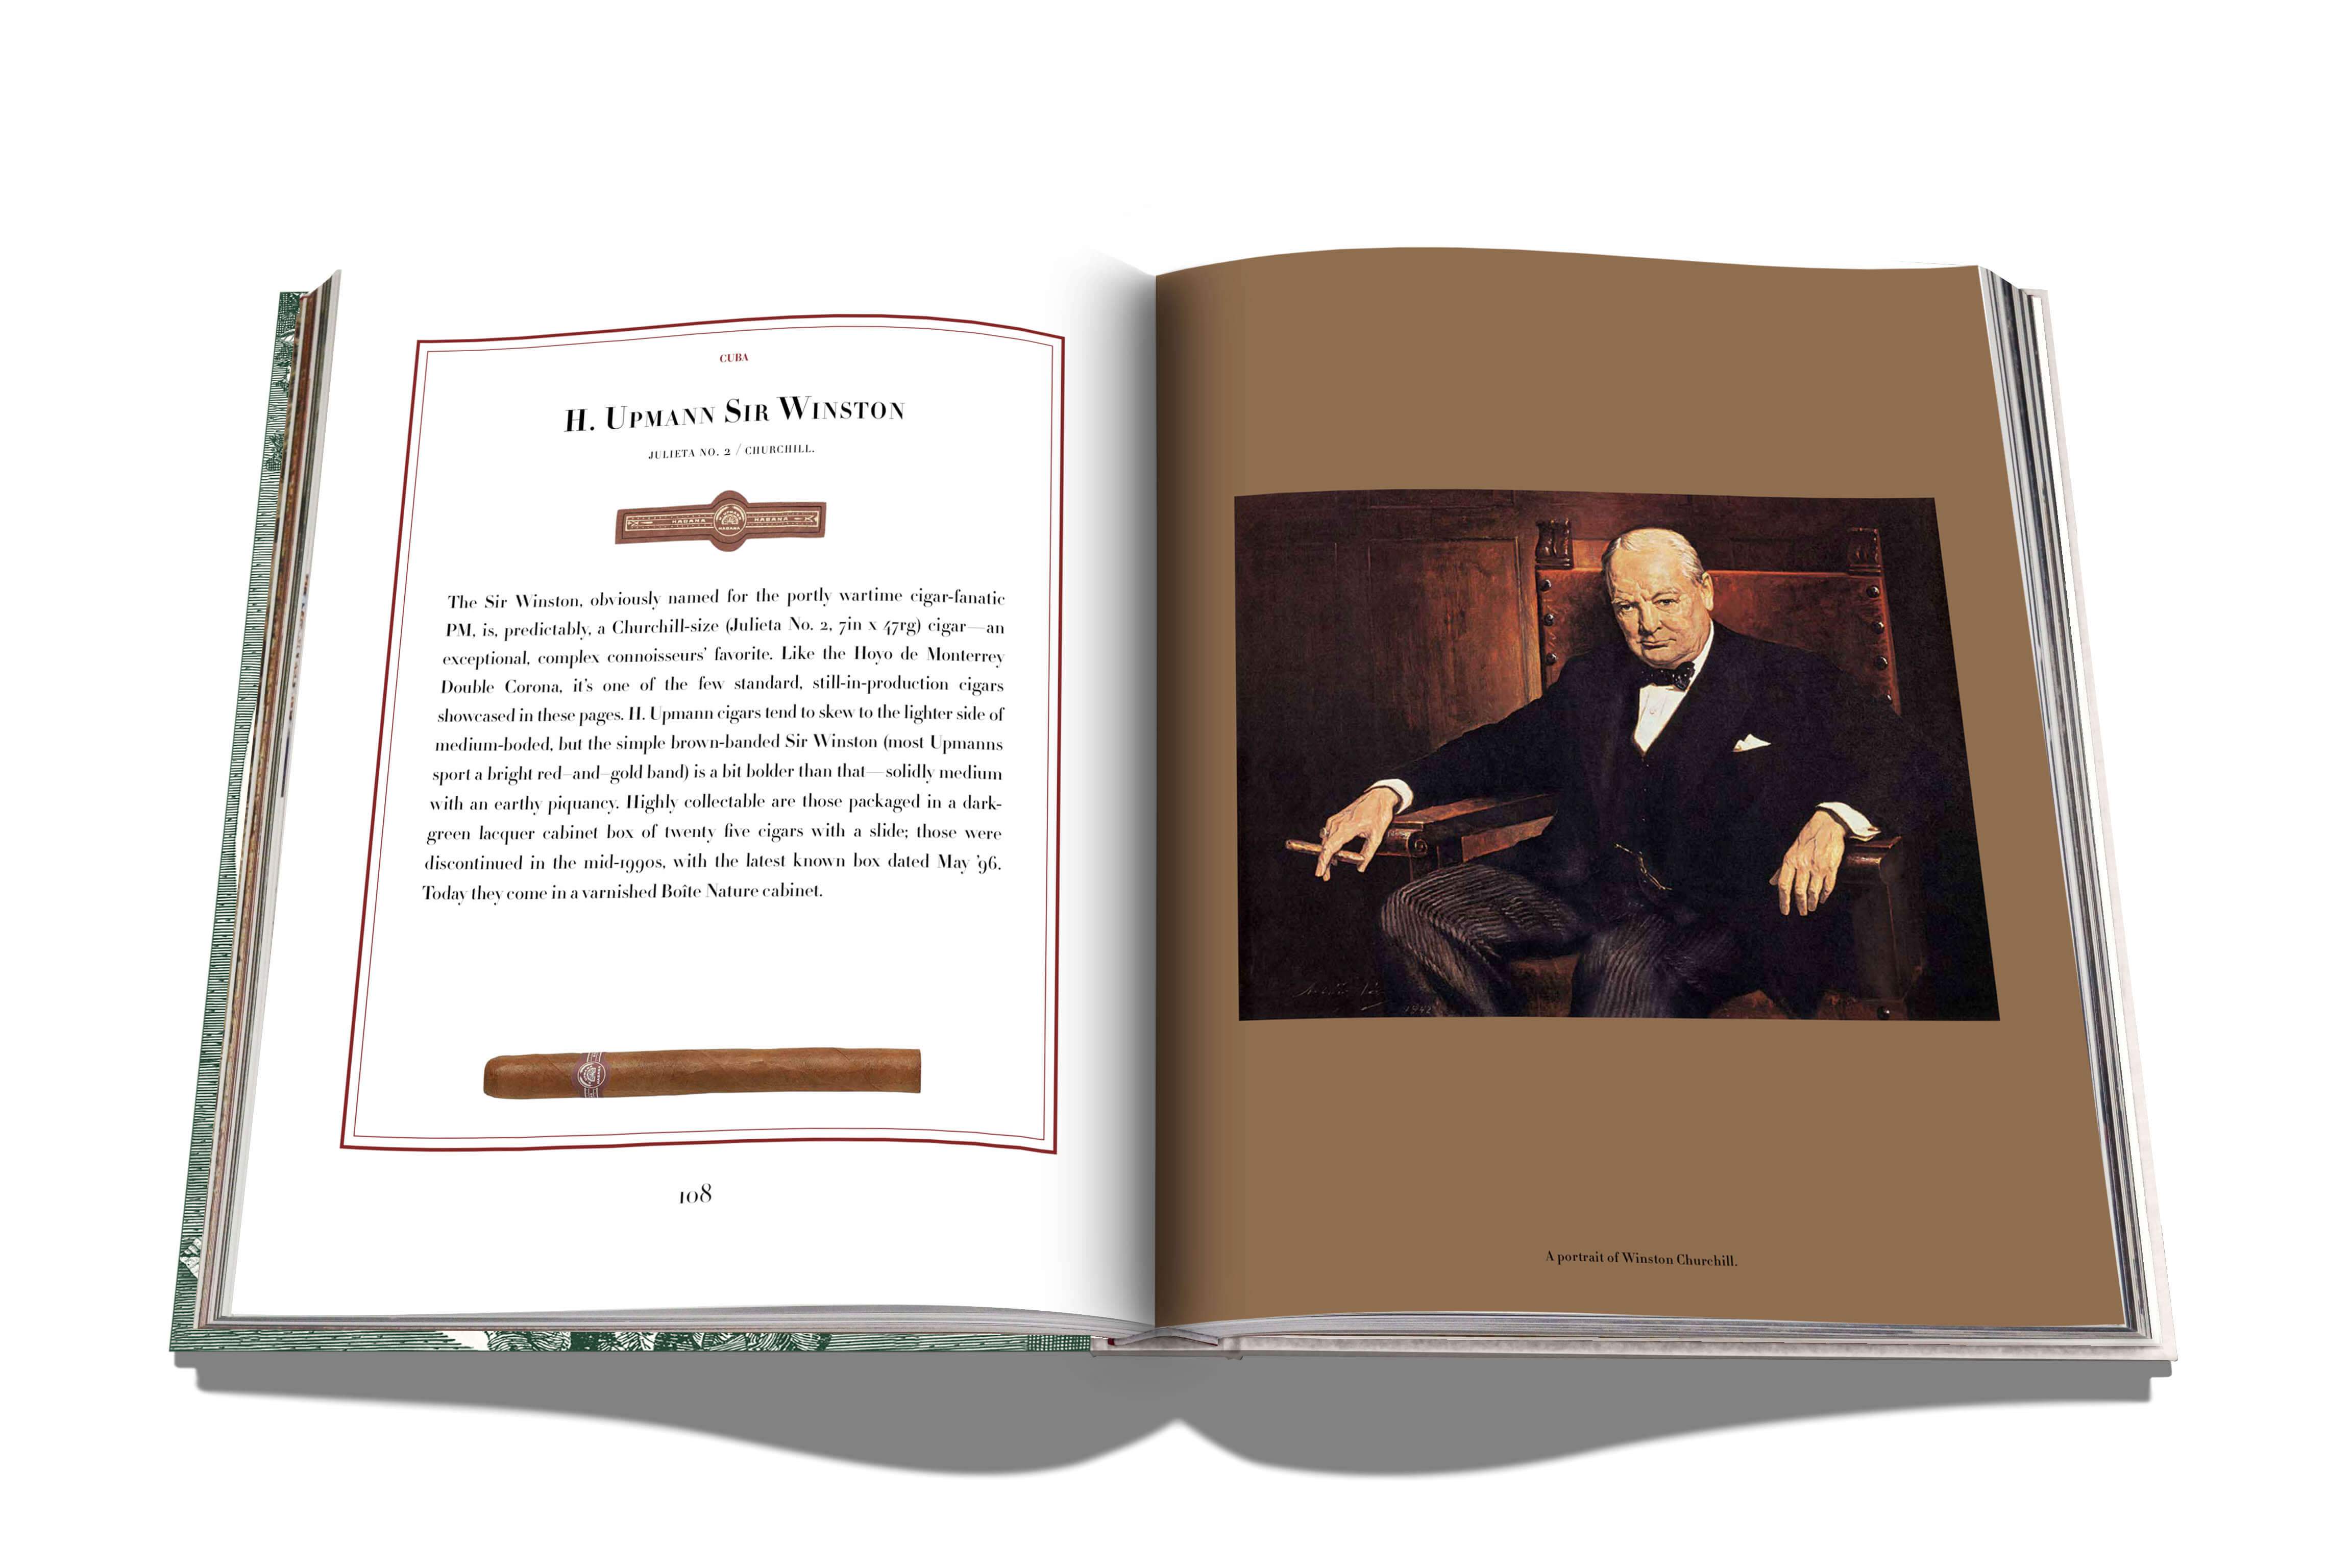 Assouline - The Impossible Collection of Cigars - Coffee Table Book